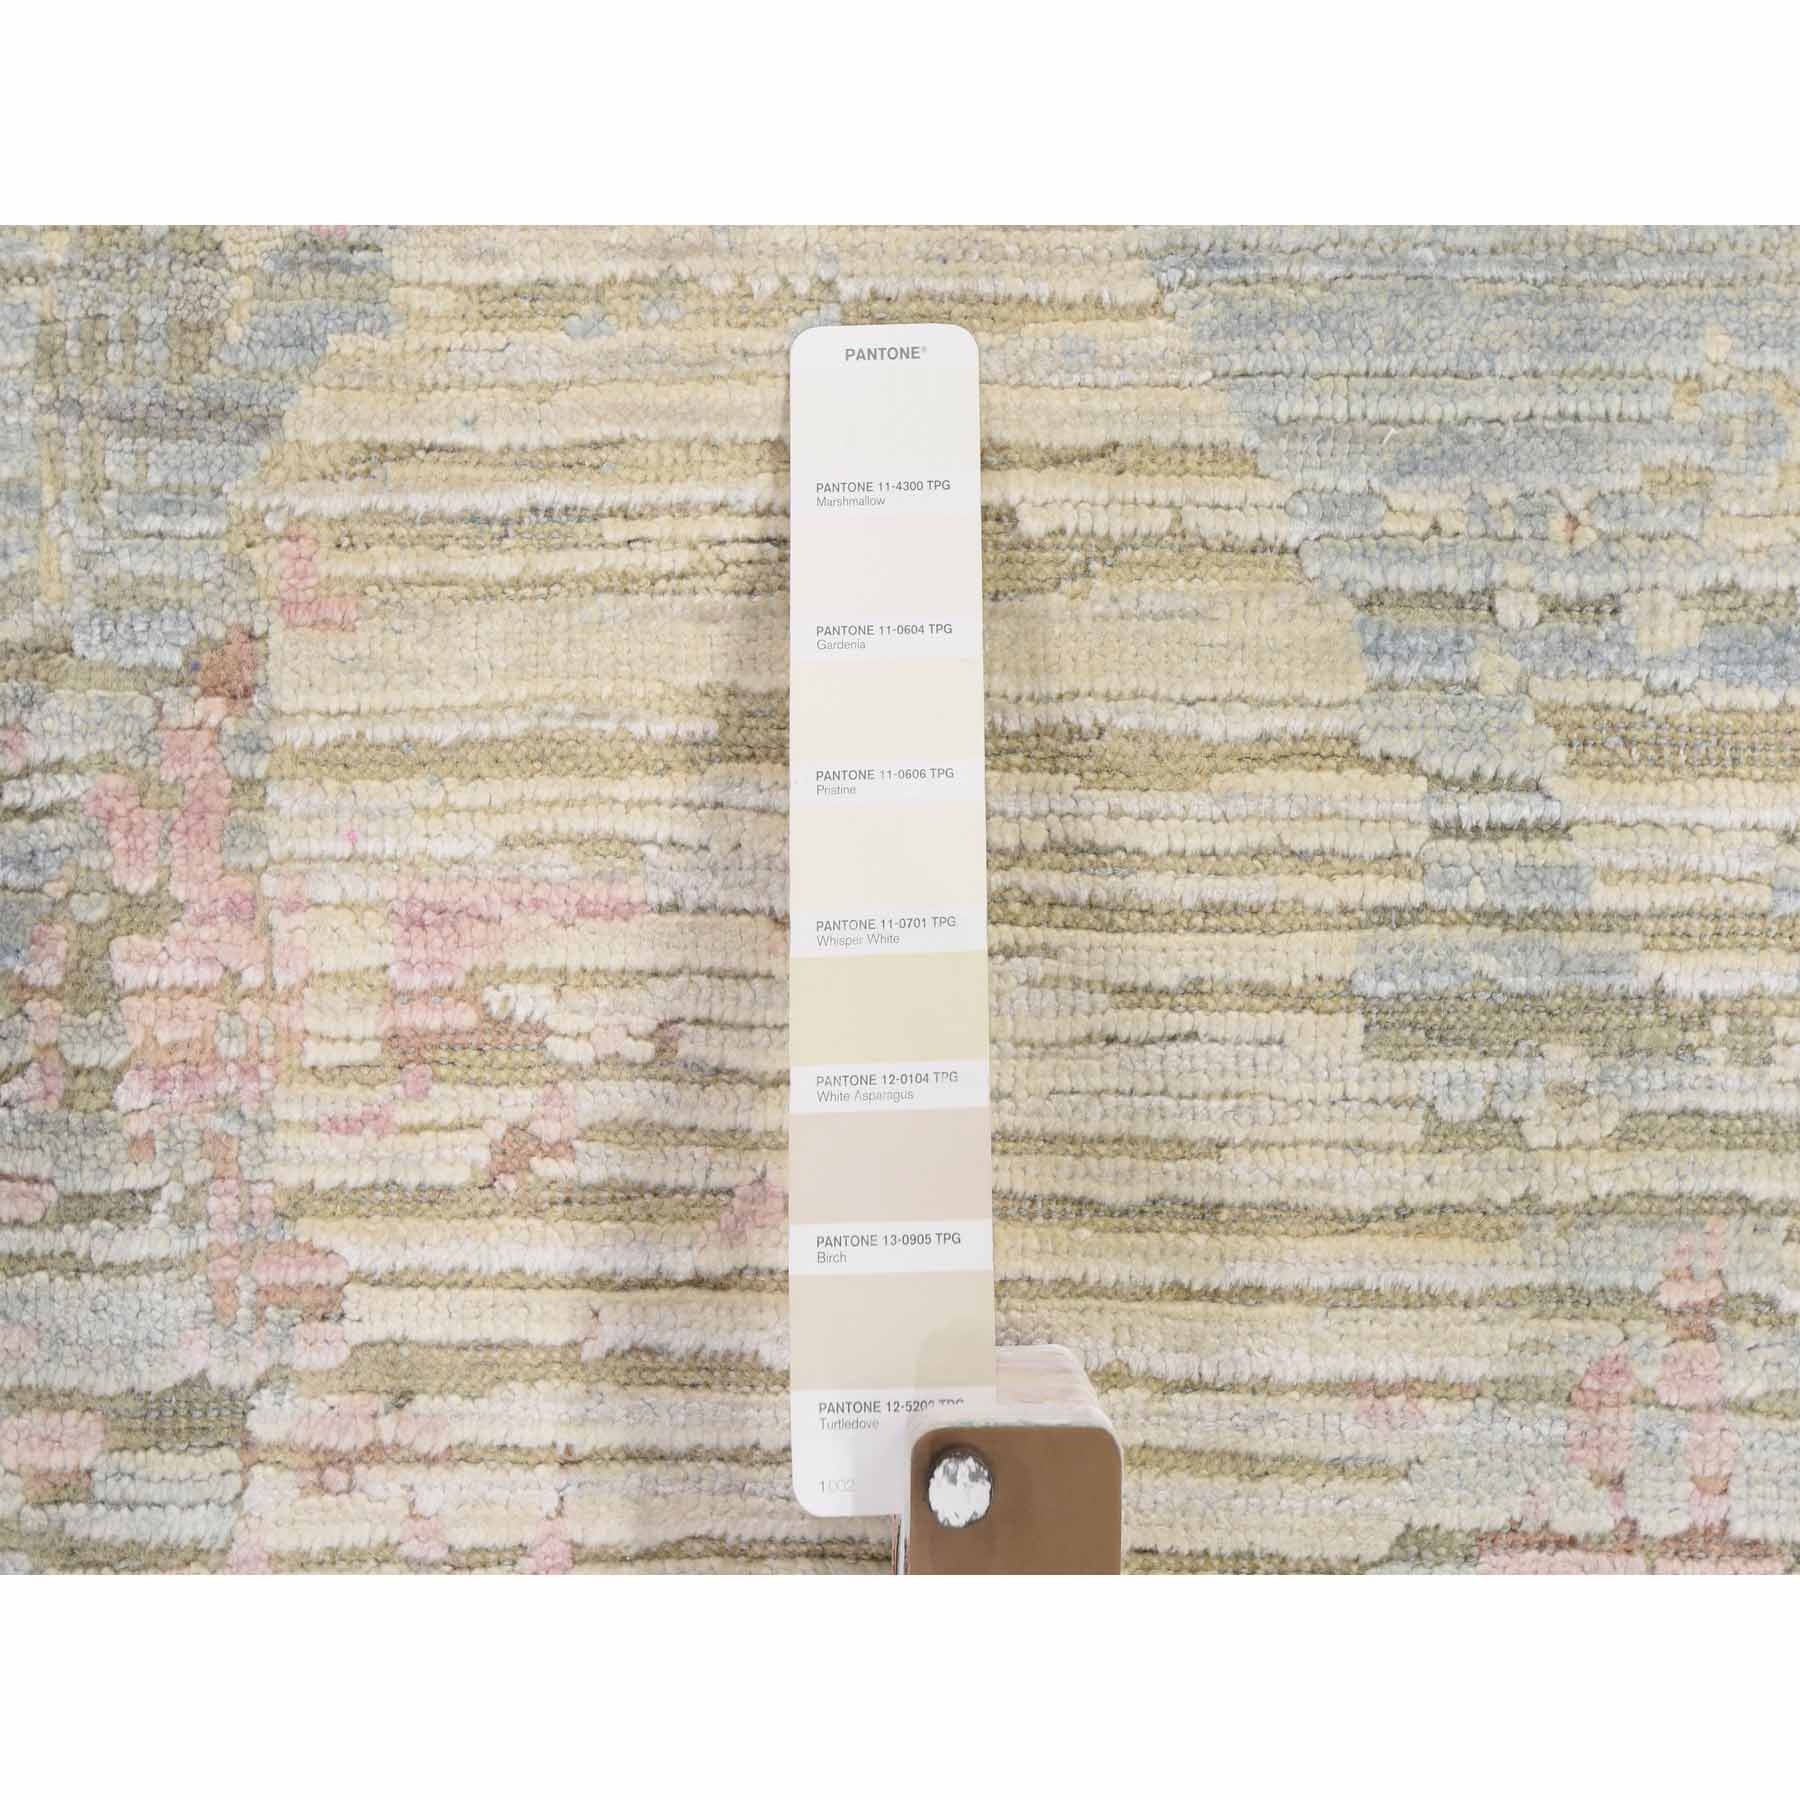 10-x14-2  THE PASTEL COLLECTION, Silk With Textured Wool Hand Knotted Oriental Rug 